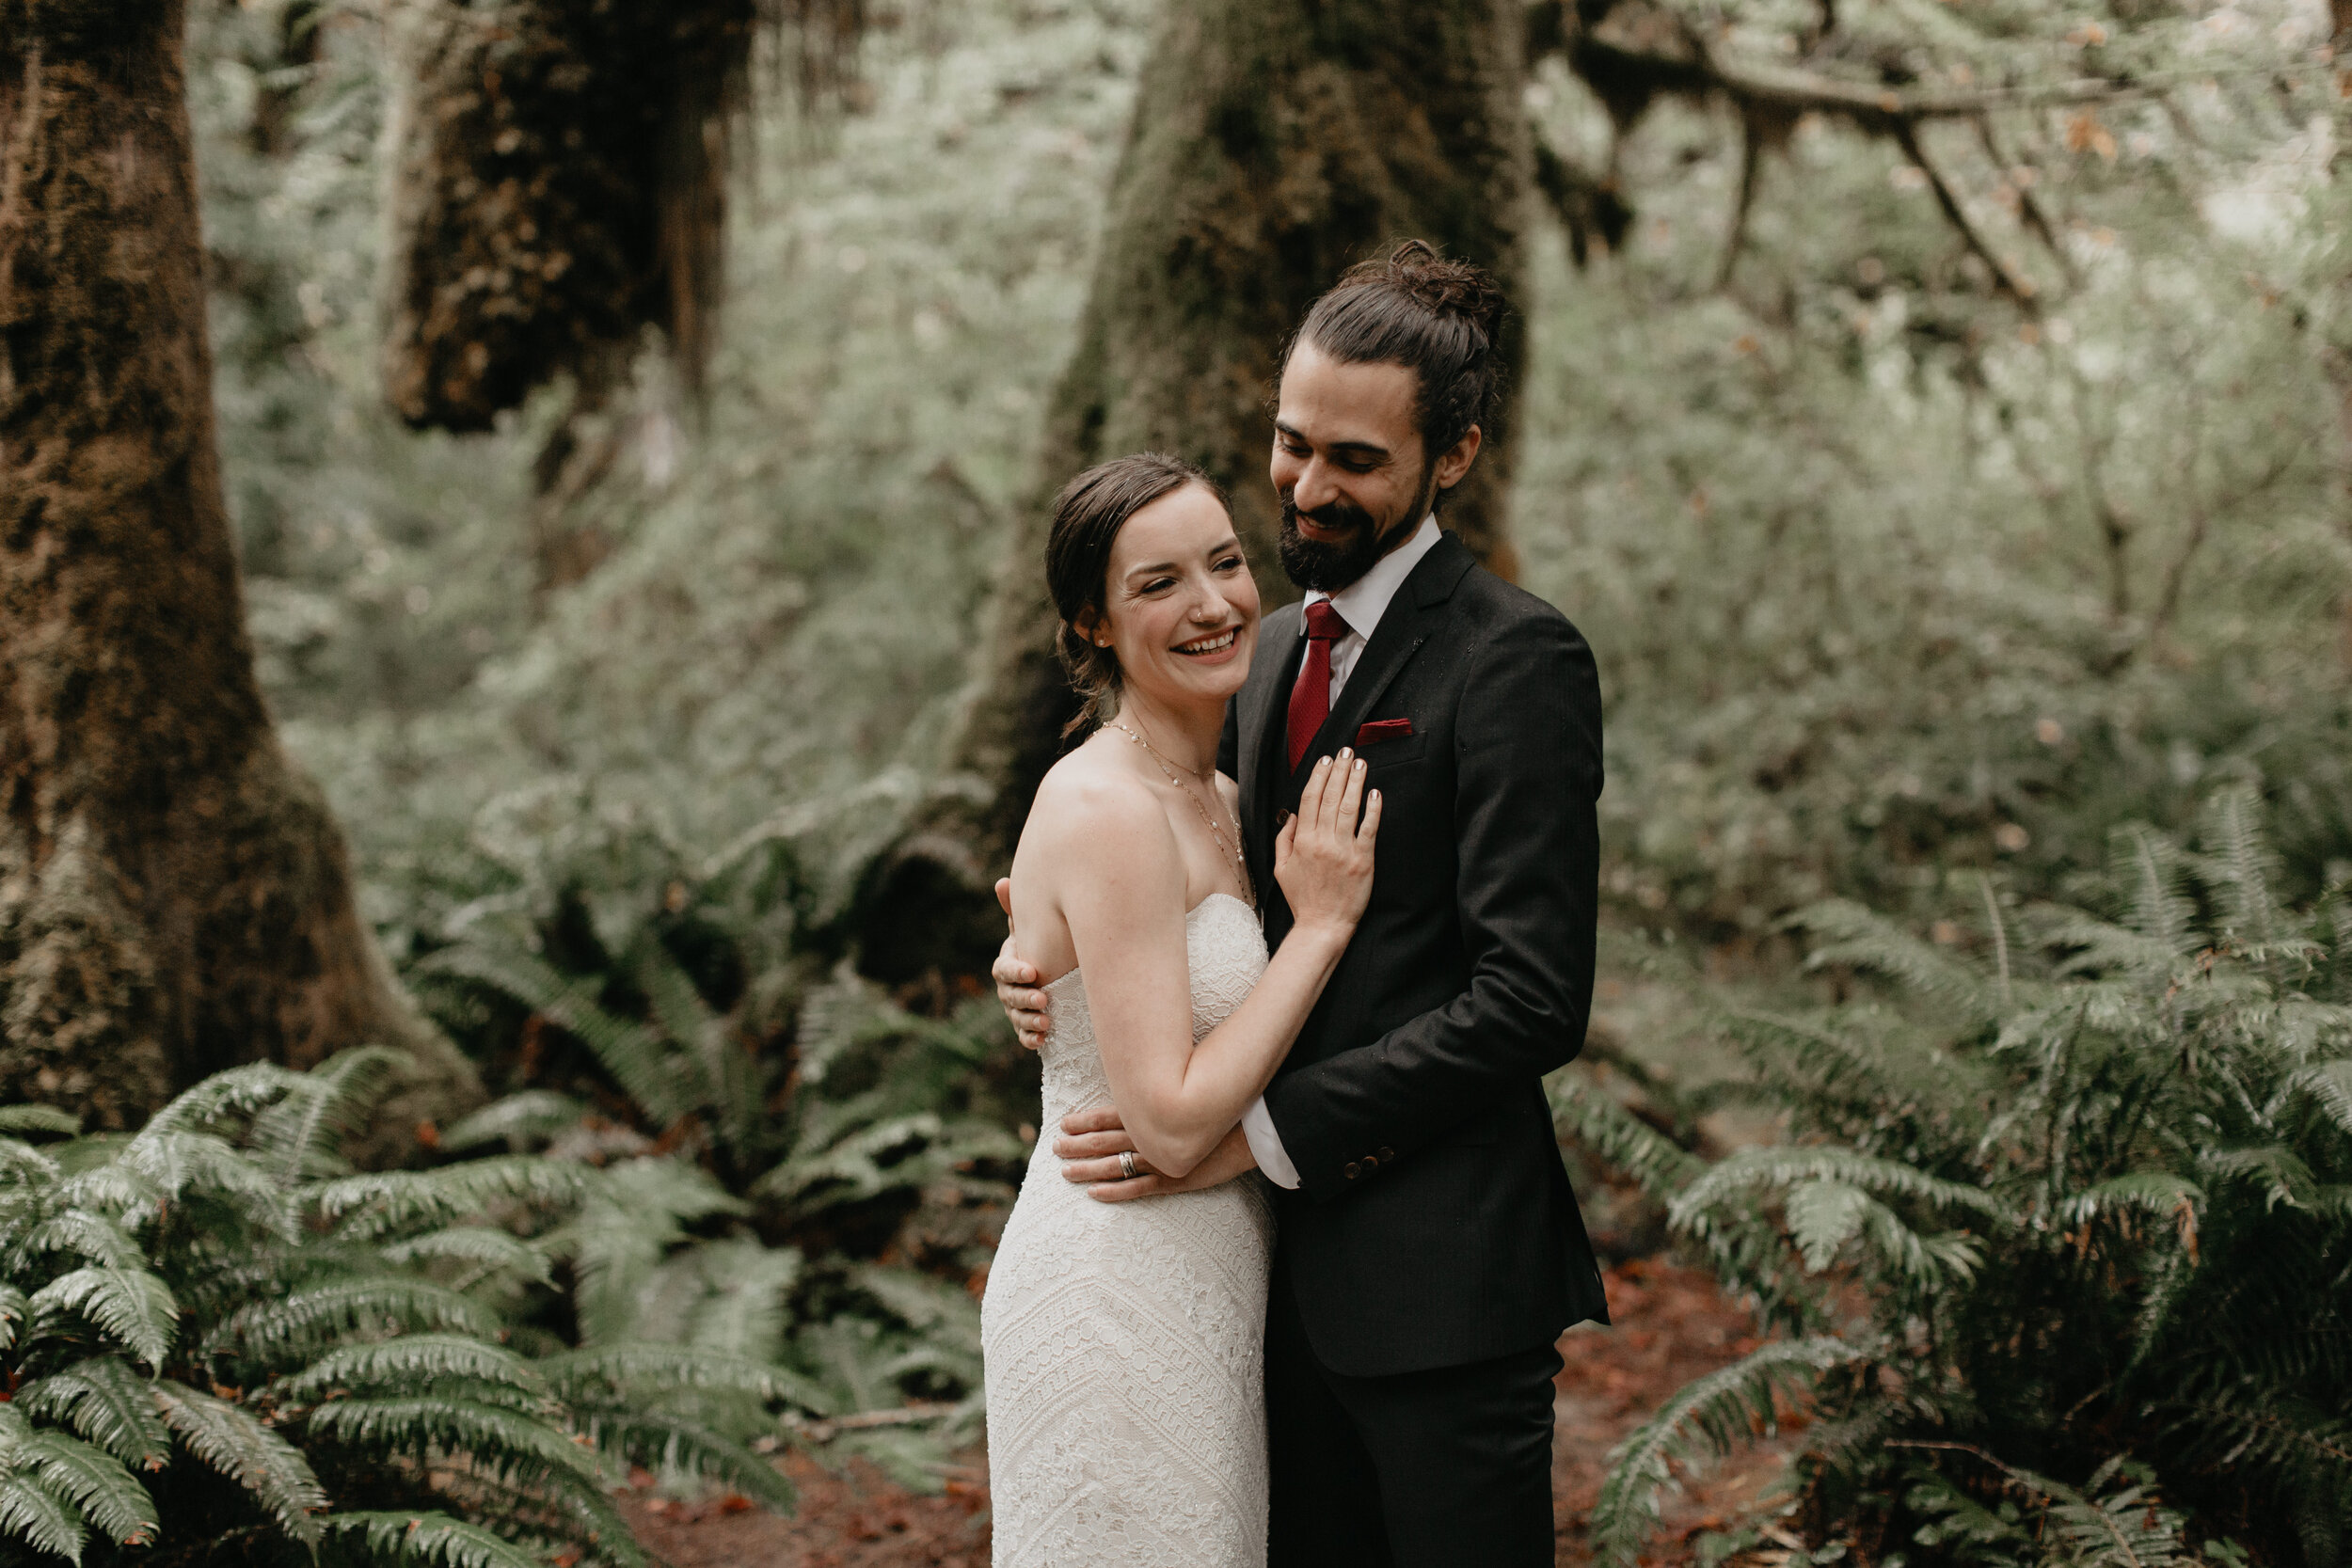 Nicole-Daacke-Photography-Olympic-national-park-elopement-photography-intimiate-elopement-in-olympic-peninsula-washington-state-rainy-day-ruby-beach-hoh-rainforest-elopement-inspiration-rainforest-pnw-elopement-photography-132.jpg